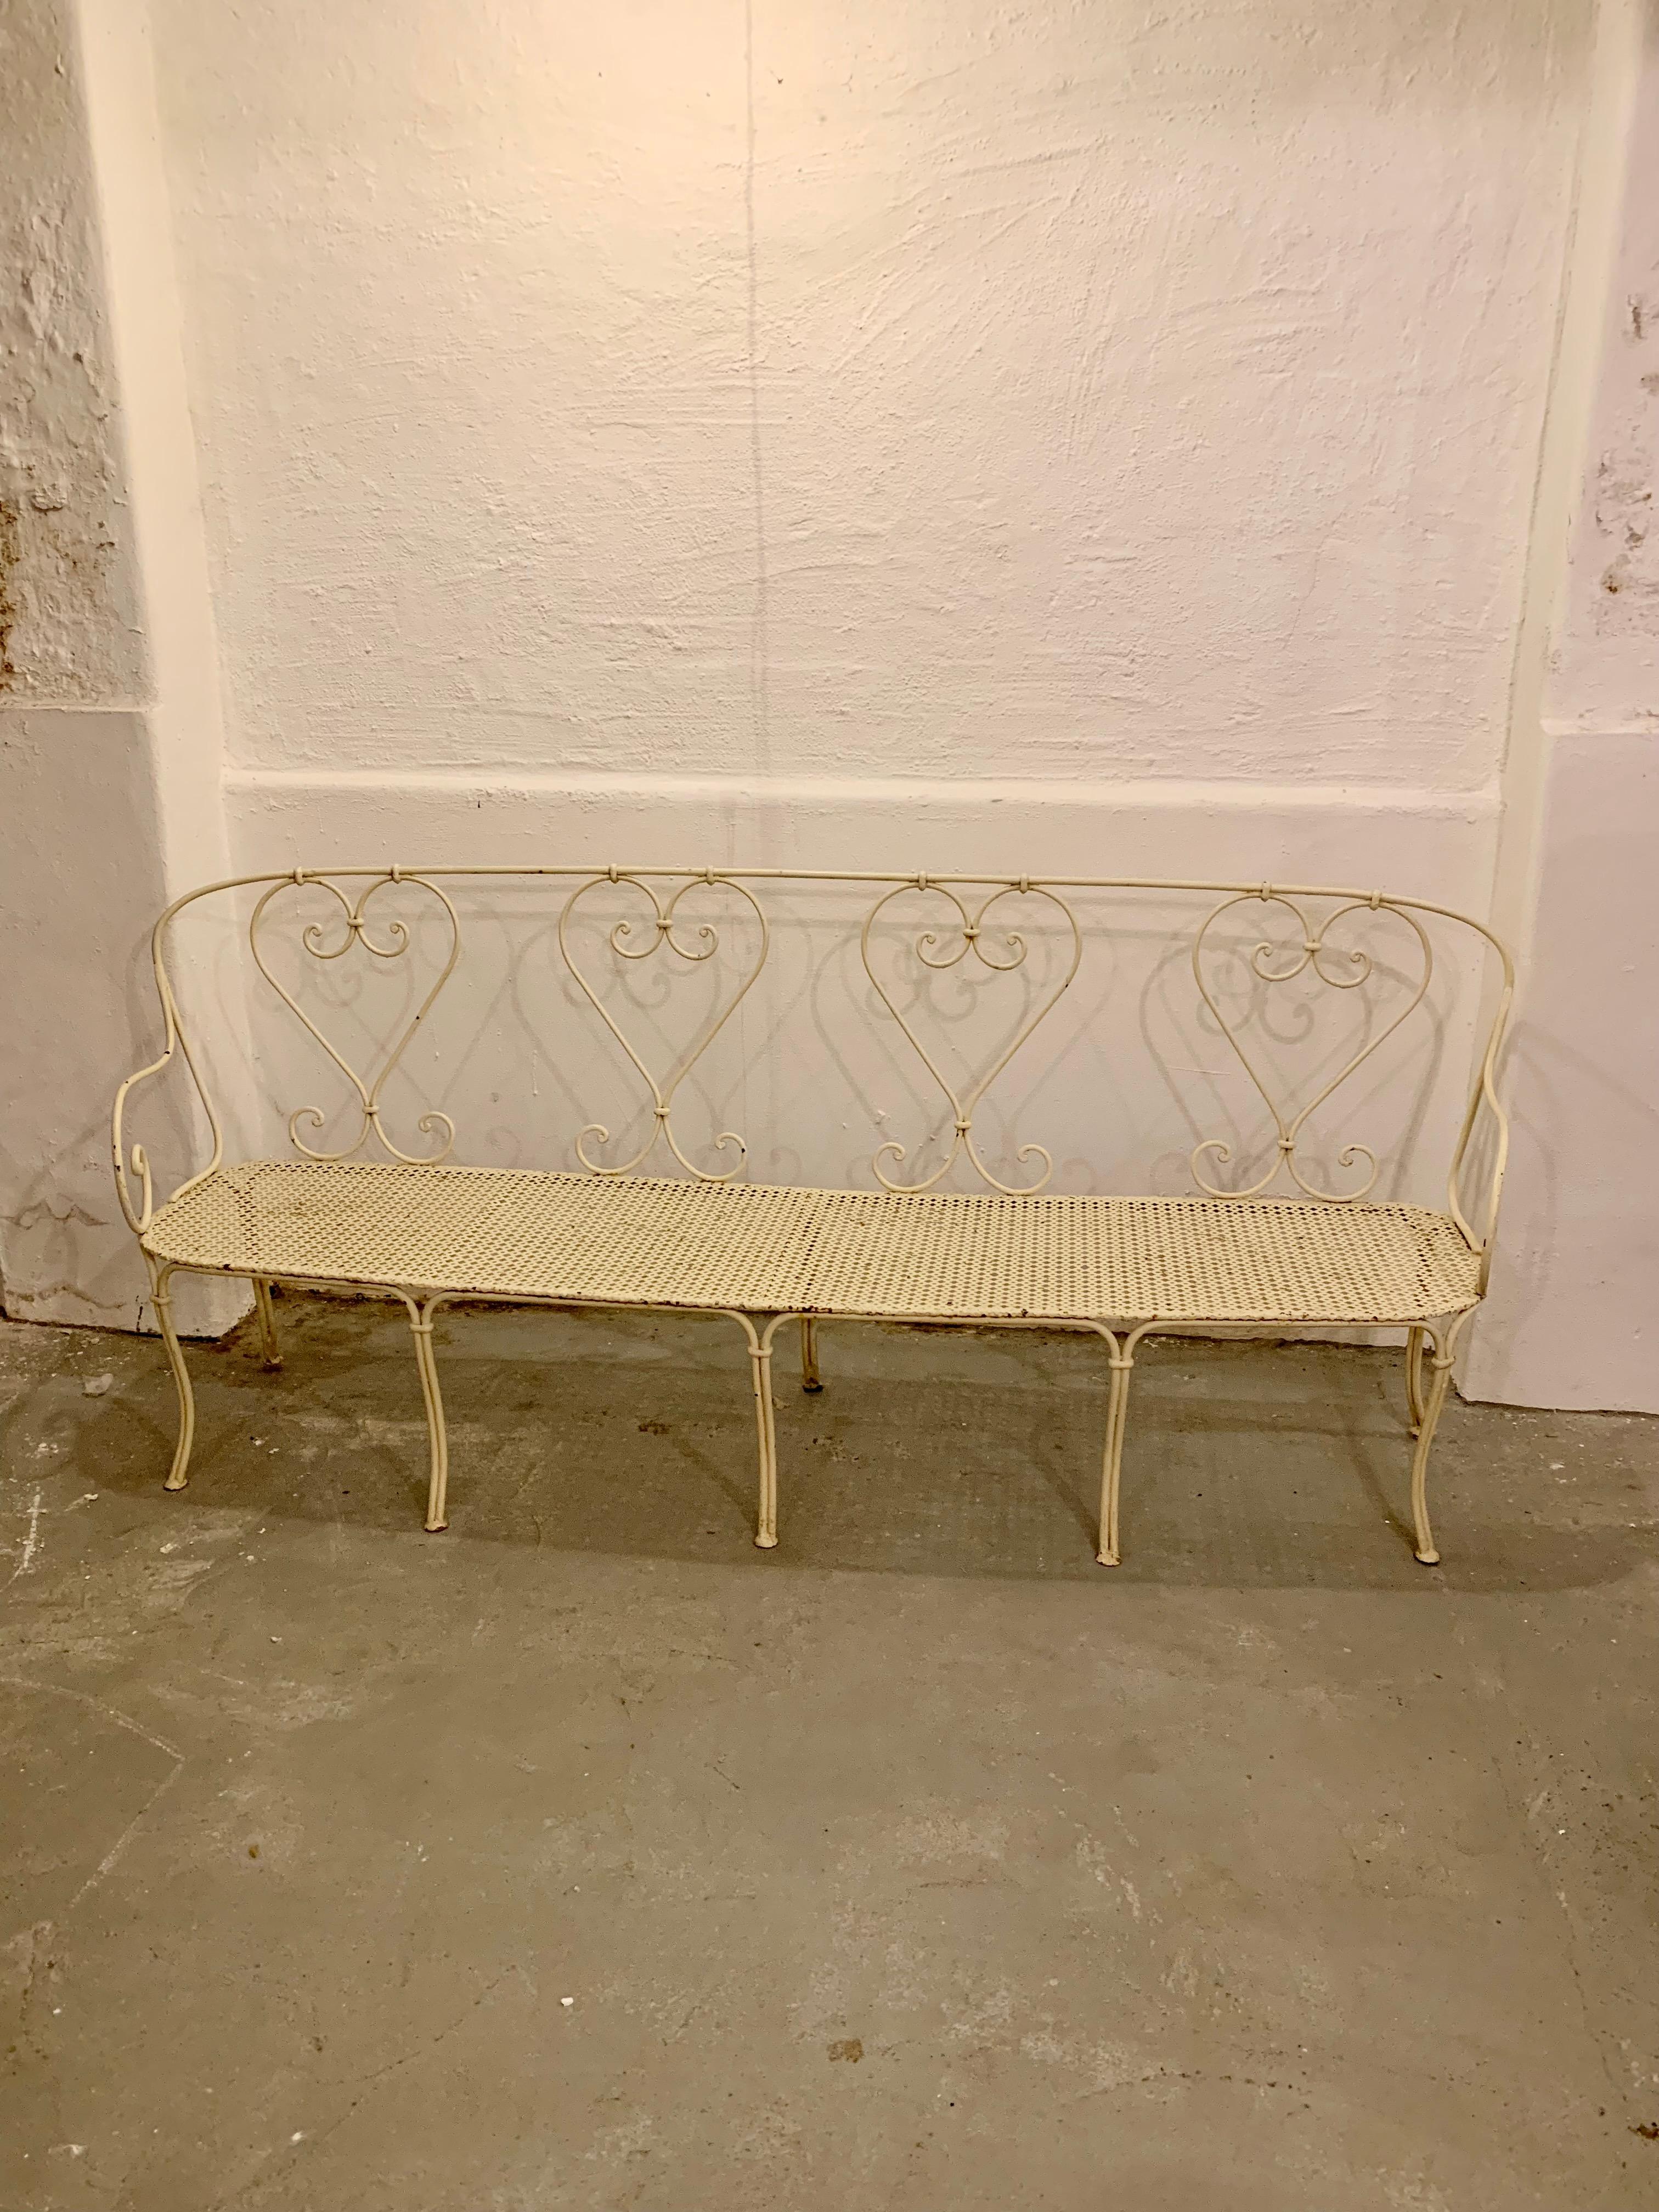 Wonderful large wrought iron garden bench. The antique white painted (egg shell) French bench is in very good condition and has great patina.